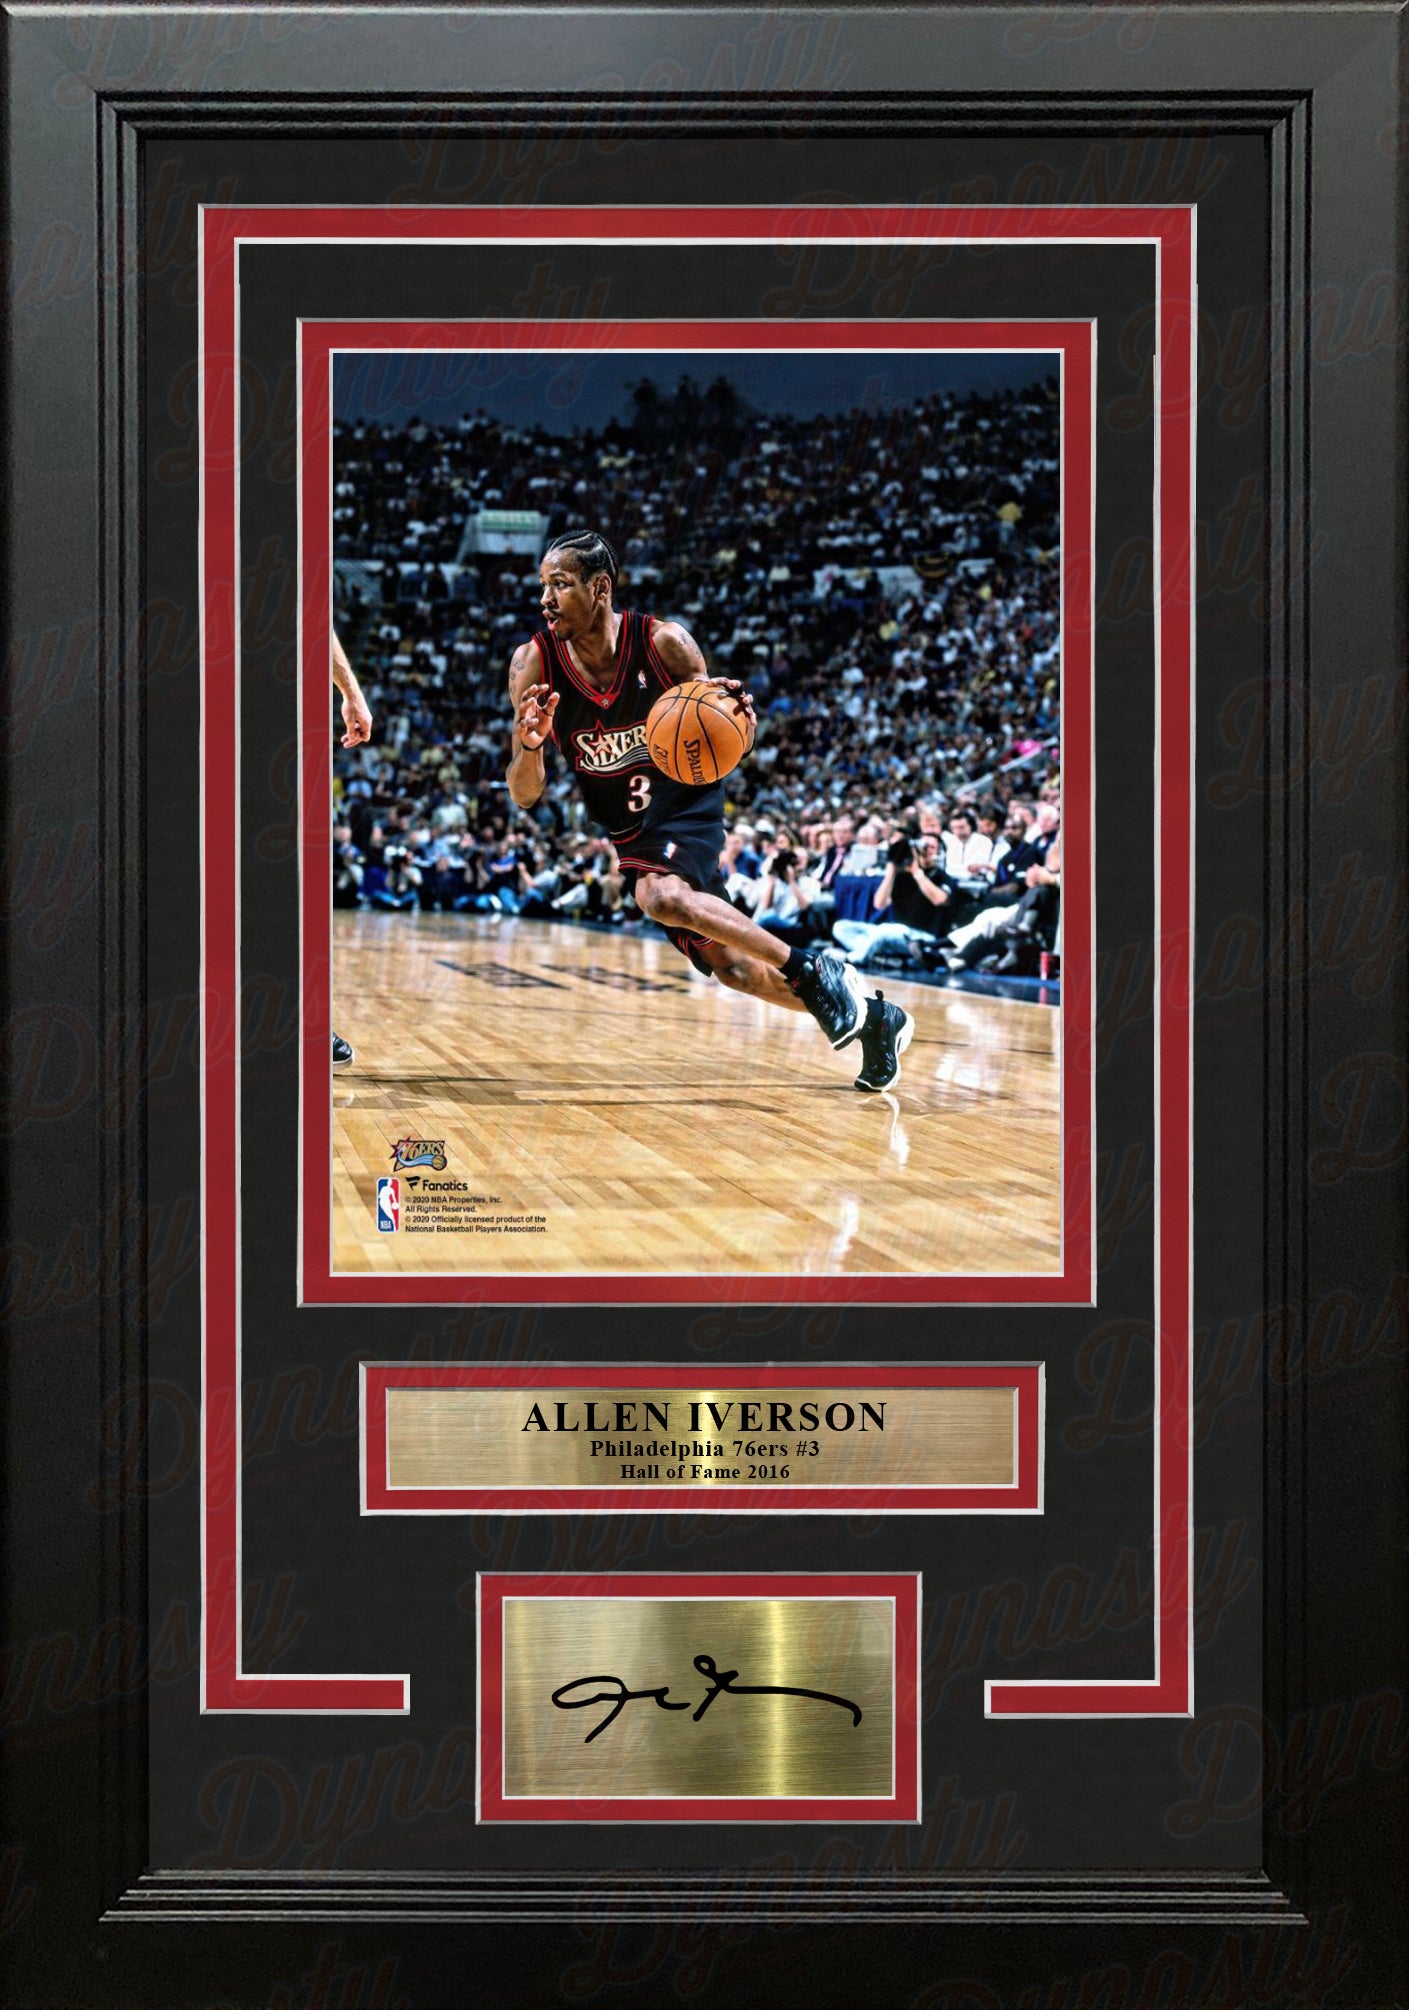 Allen Iverson in Action Philadelphia 76ers 8" x 10" Framed Basketball Photo with Engraved Autograph - Dynasty Sports & Framing 